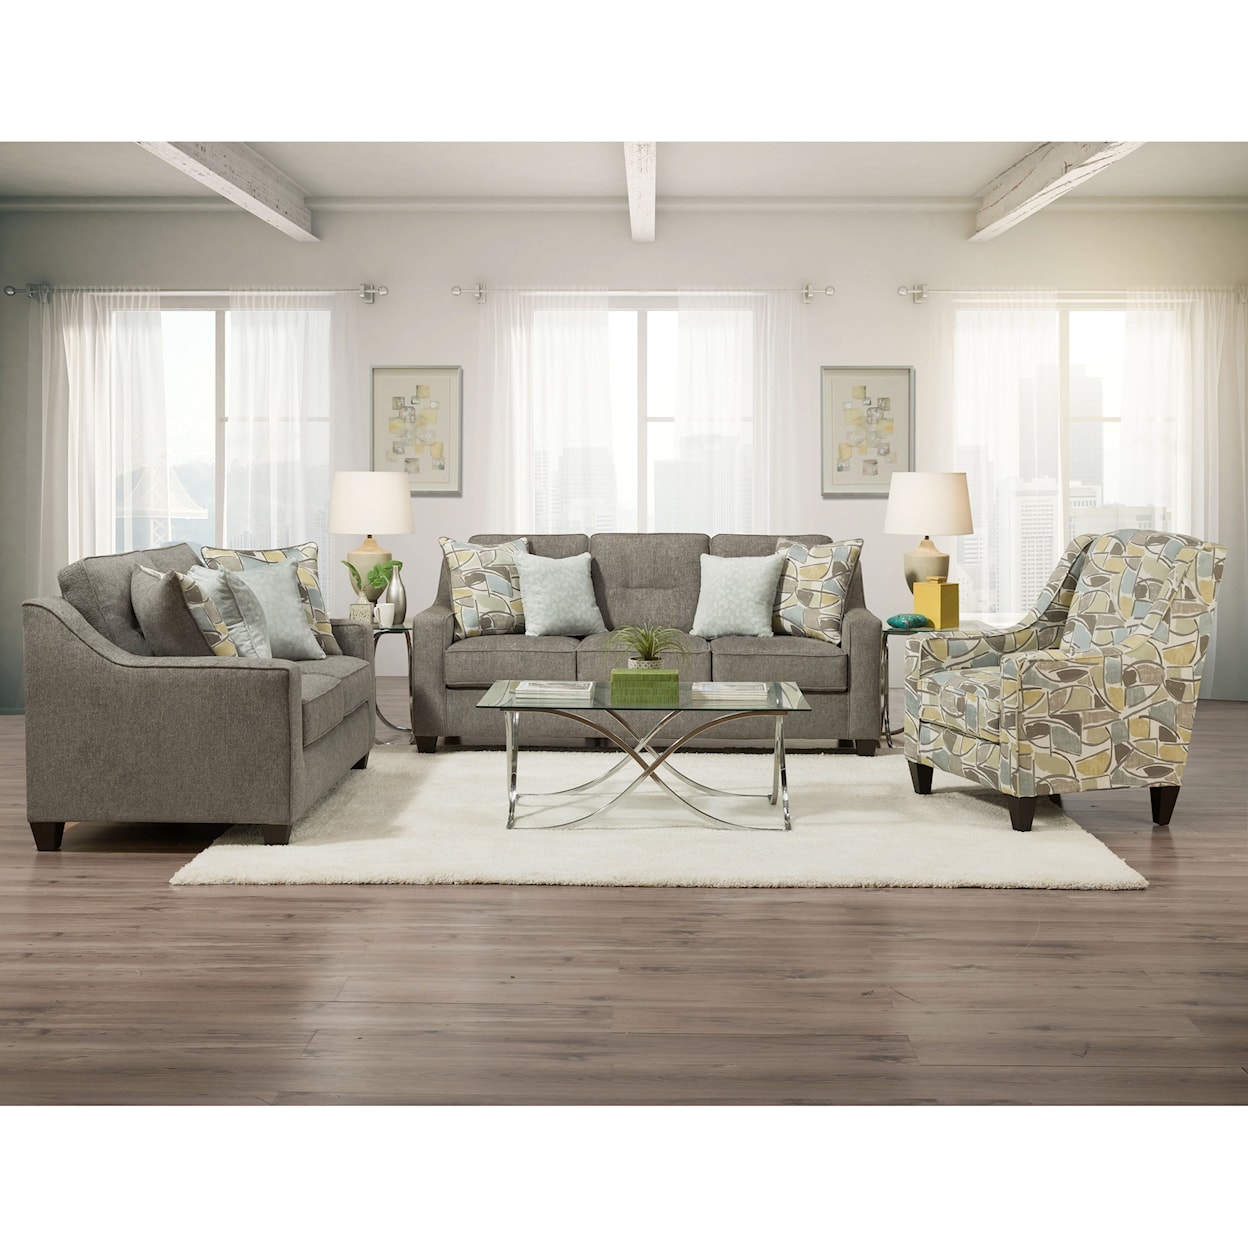 Peak Living 3450 Sofa with Track Arms